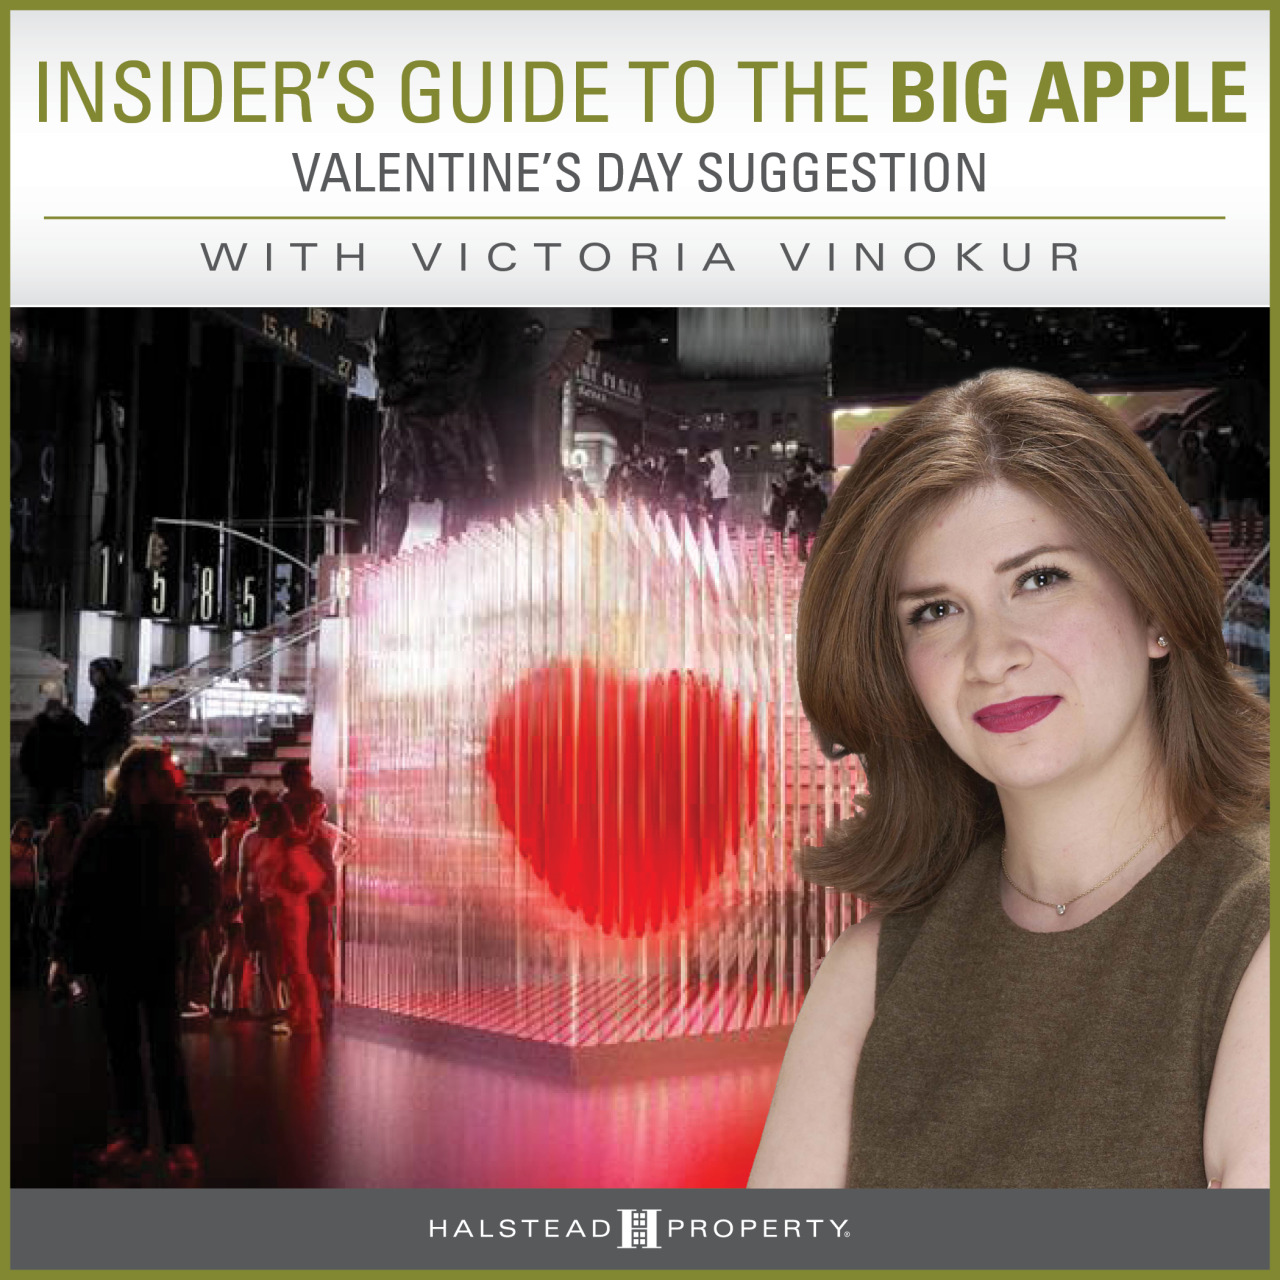 INSIDER’S GUIDE TO THE BIG APPLE - VALENTINE’S DAY SUGGESTION
Valentine’s Day is rapidly approaching, but it’s not time to panic just yet! If you are drawing a blank on how to impress your date on February 14th, then Halstead agent Victoria Vinokur...